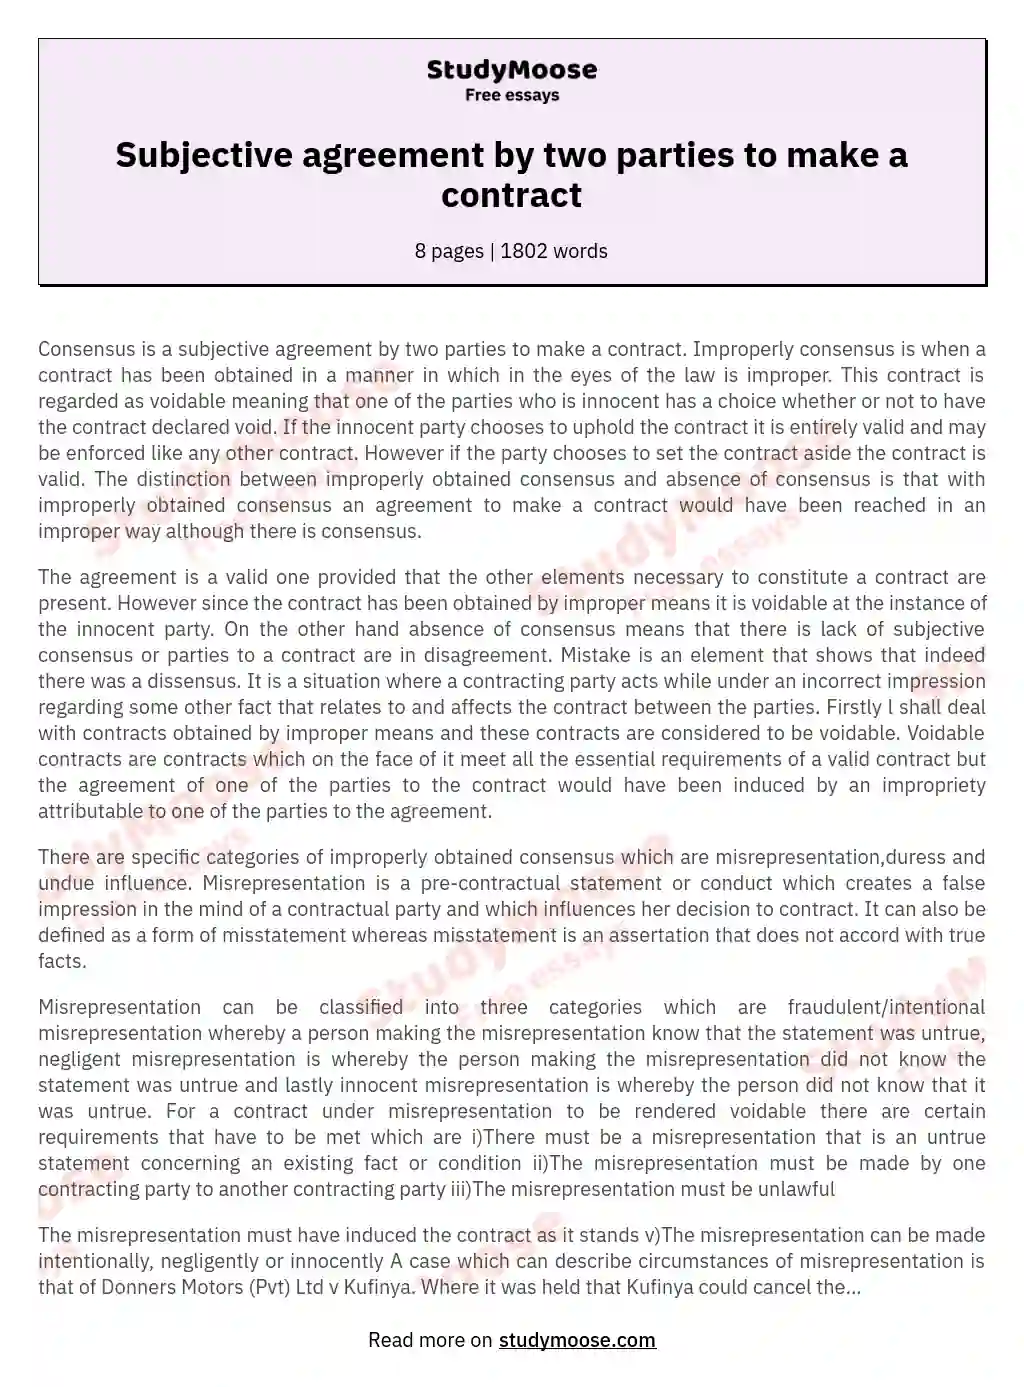 Subjective agreement by two parties to make a contract essay